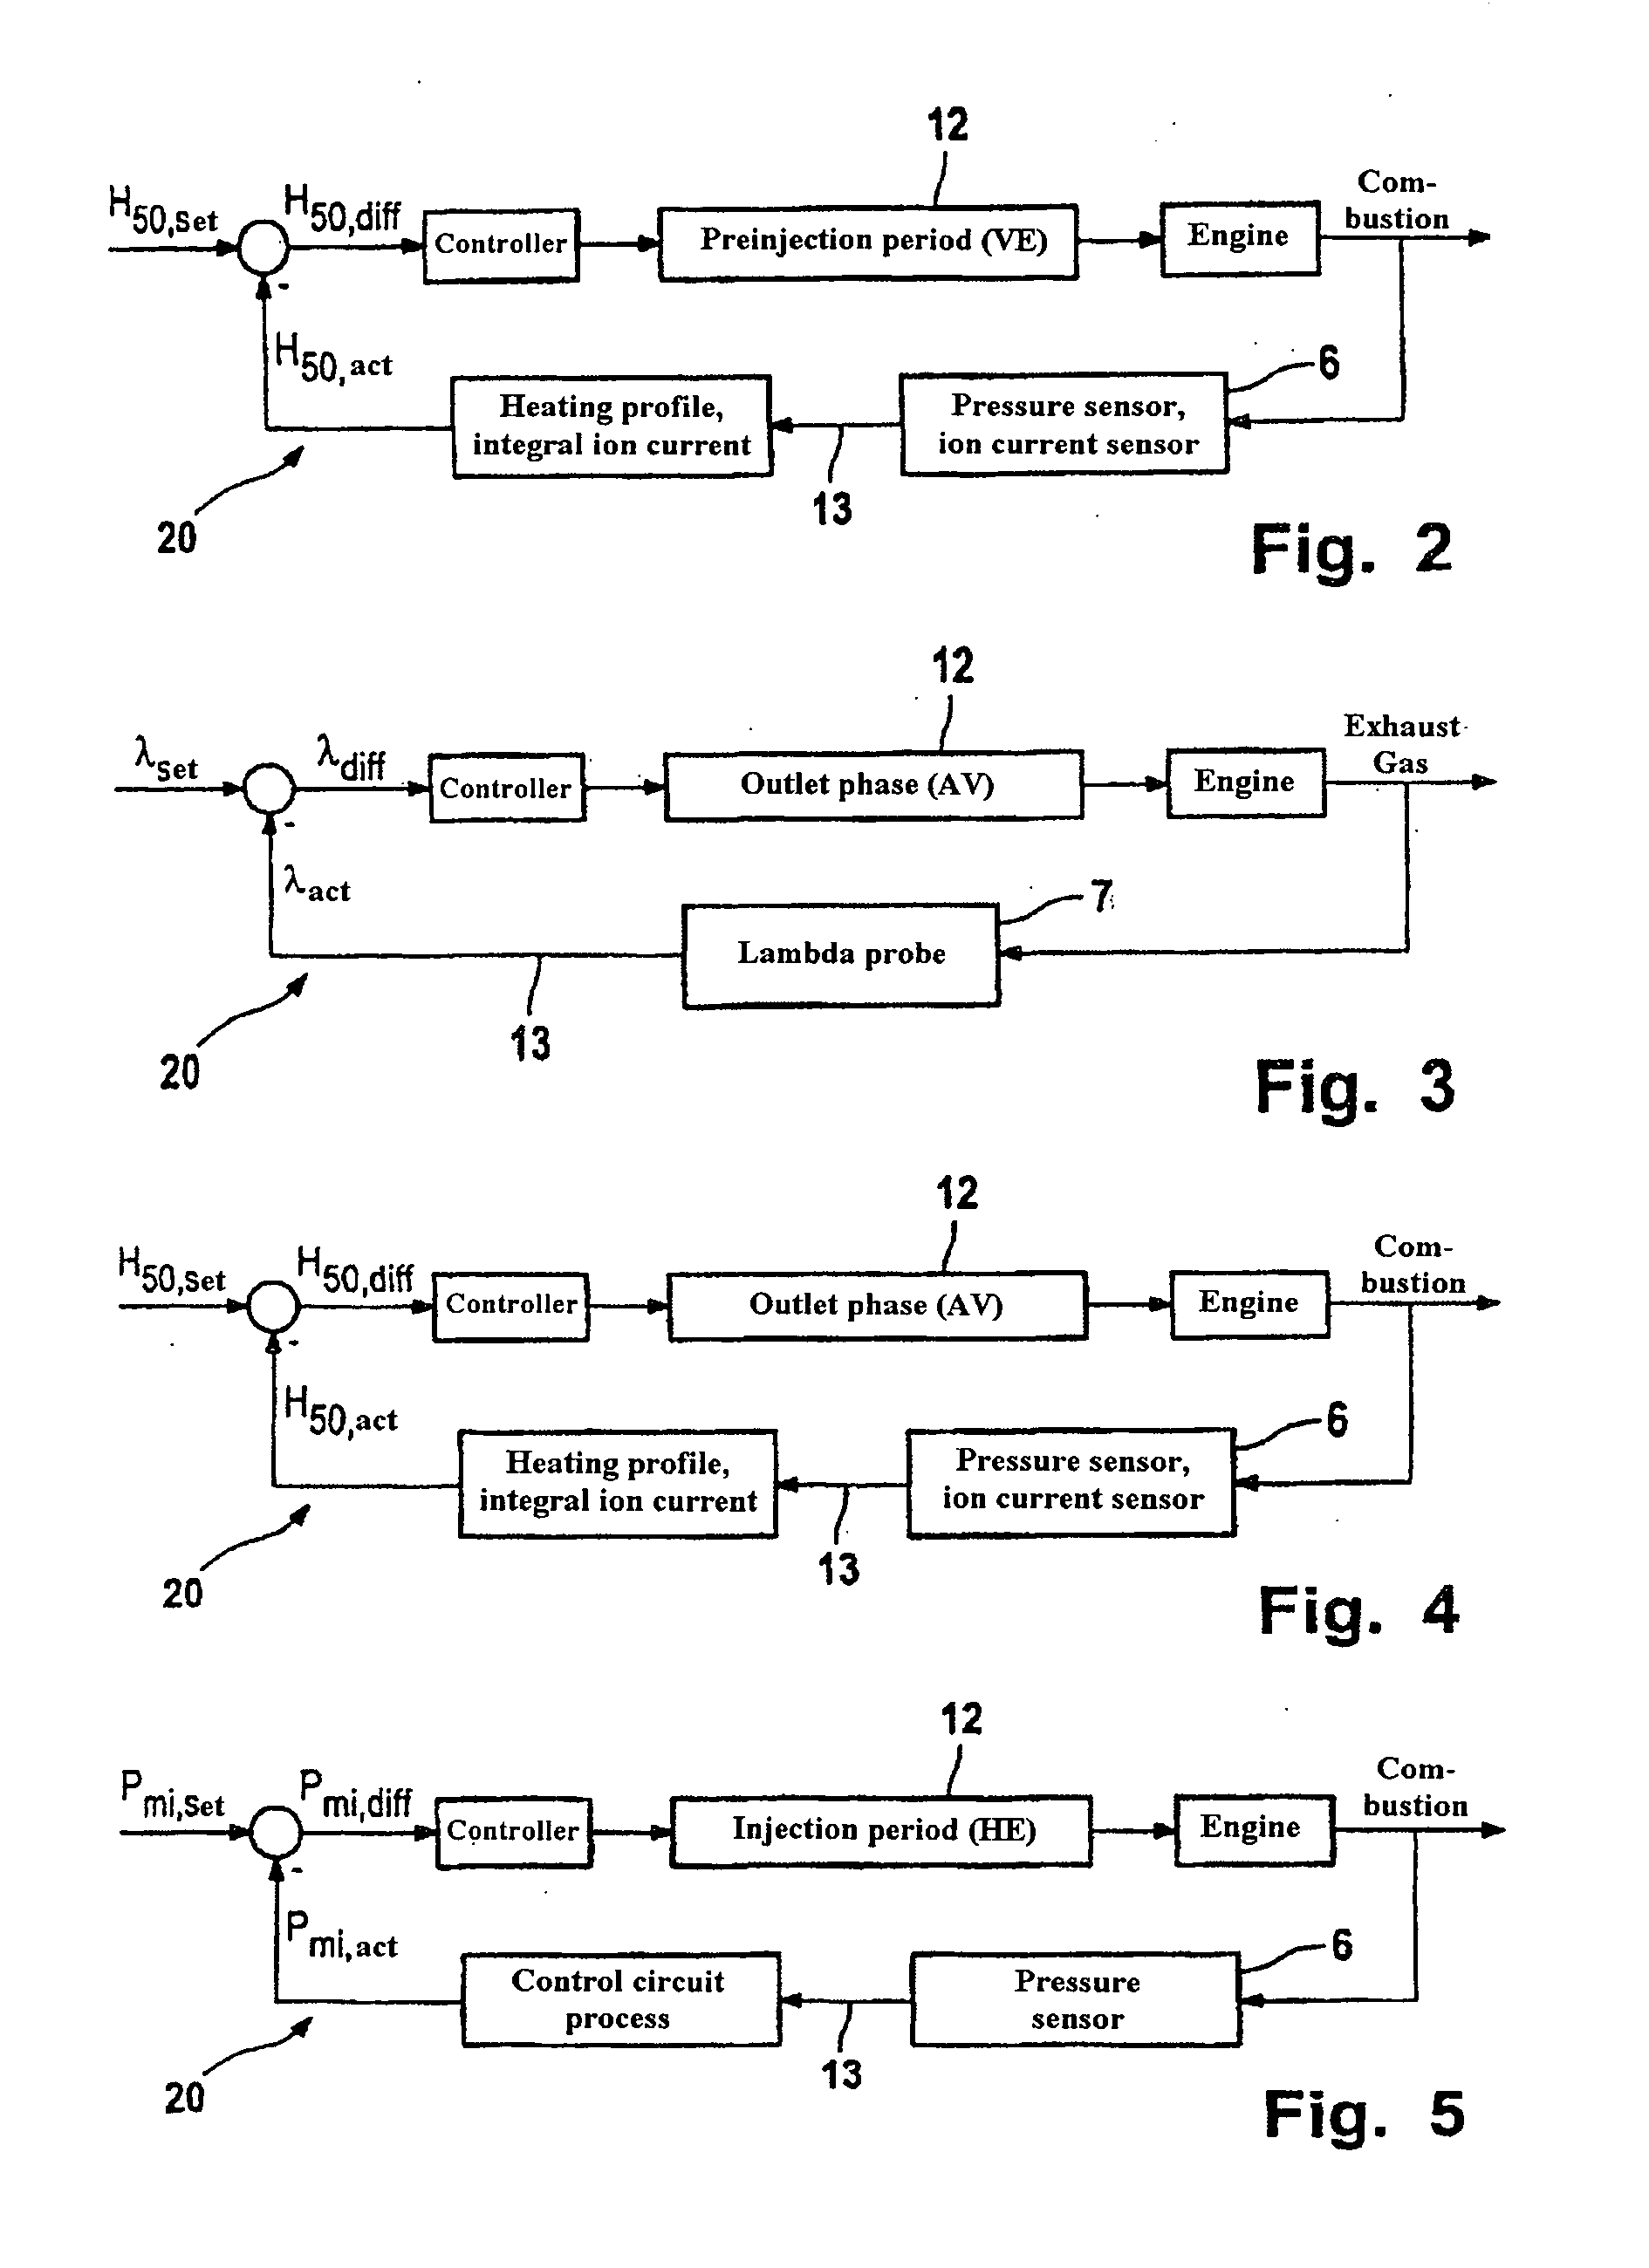 Method for controlling the compression ignition mode of an internal combustion engine